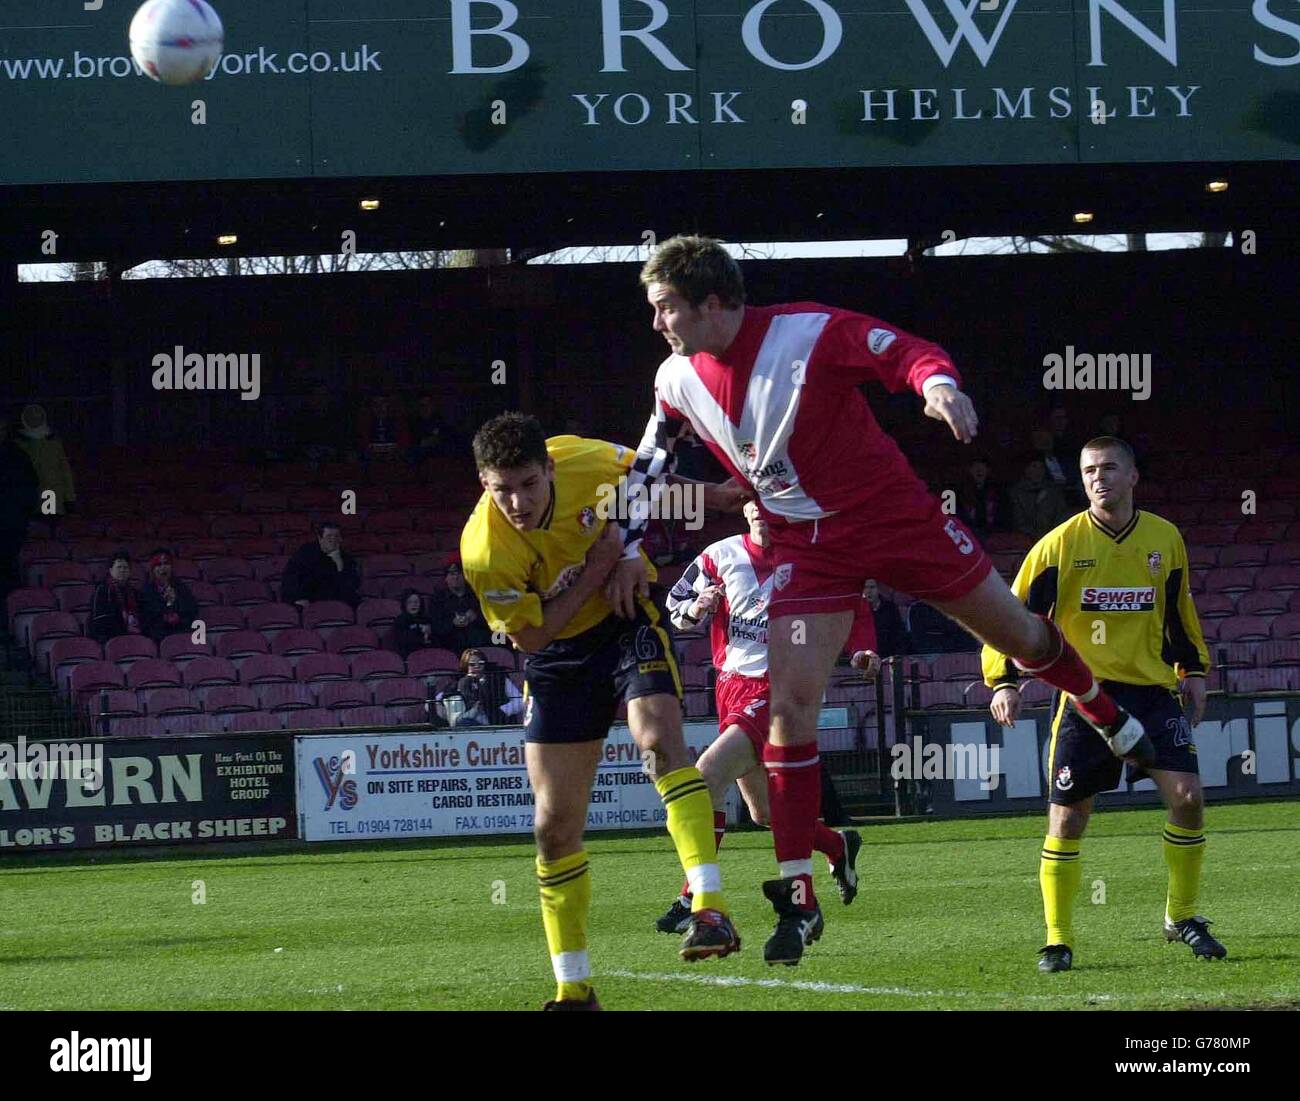 York's John Parkin (centre right) heads over the bar during the Nationwide Divison 3 match against Bournemouth at Bootham Crescent, York. York defeated Bournemouth 1-0. NO UNOFFICIAL CLUB WEBSITE USE. Stock Photo